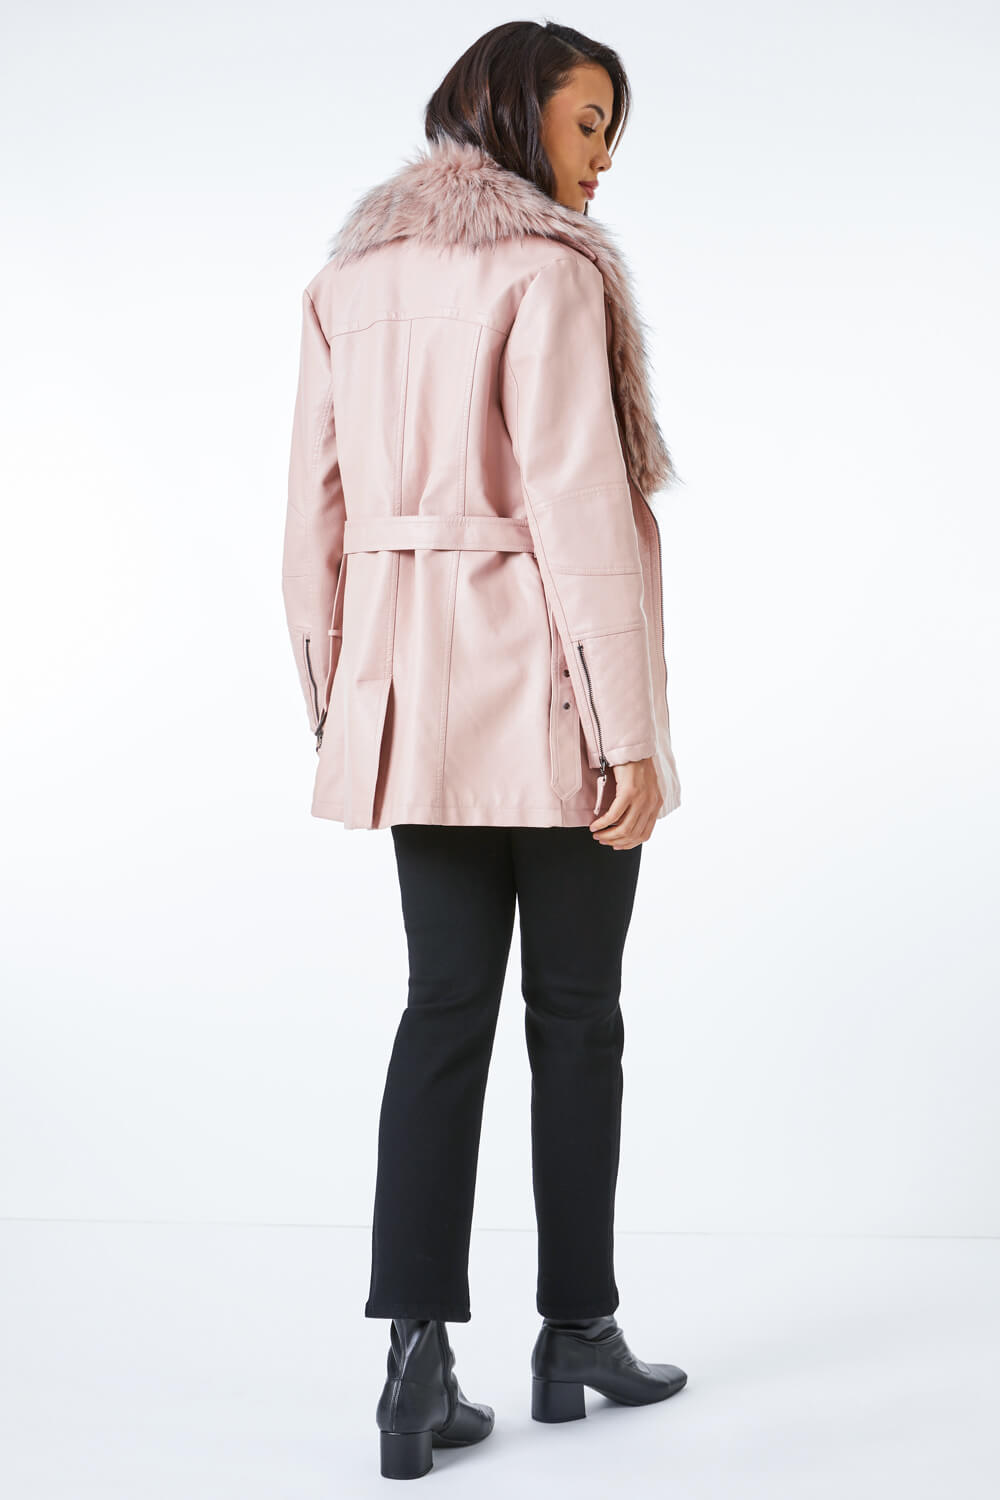 PINK Longline Faux Leather Belted Coat, Image 3 of 5